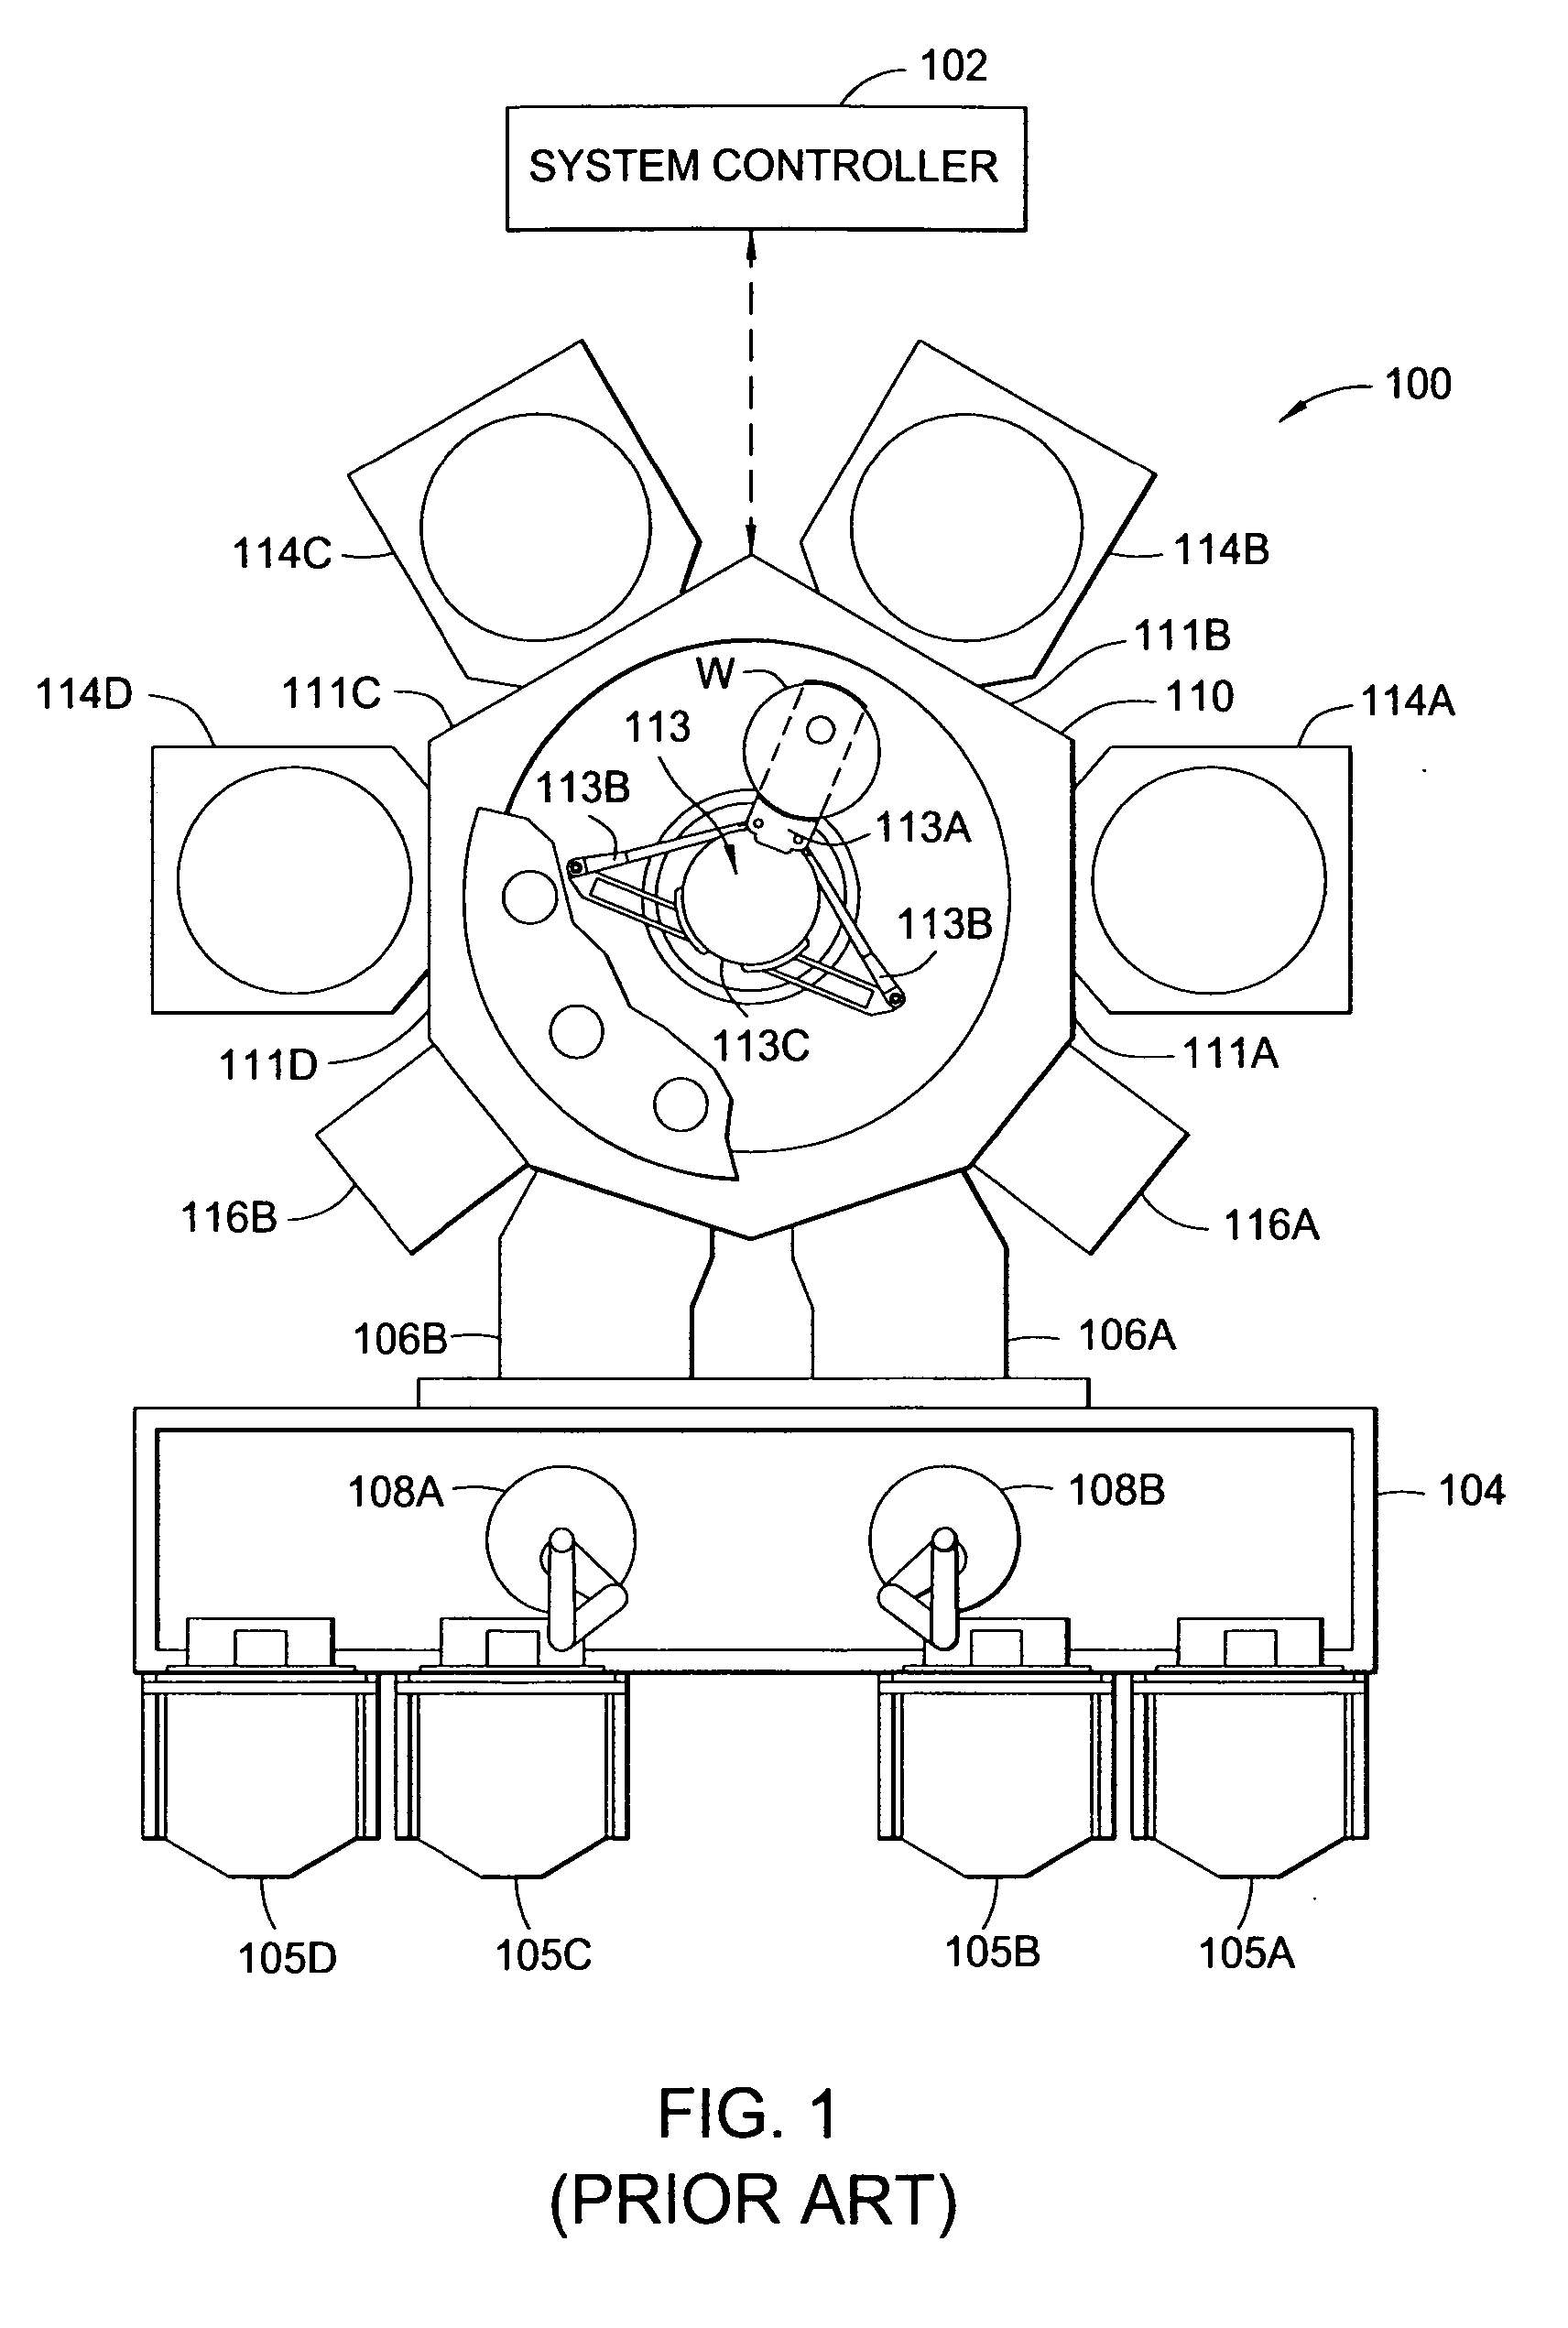 Substrate processing apparatus using a batch processing chamber